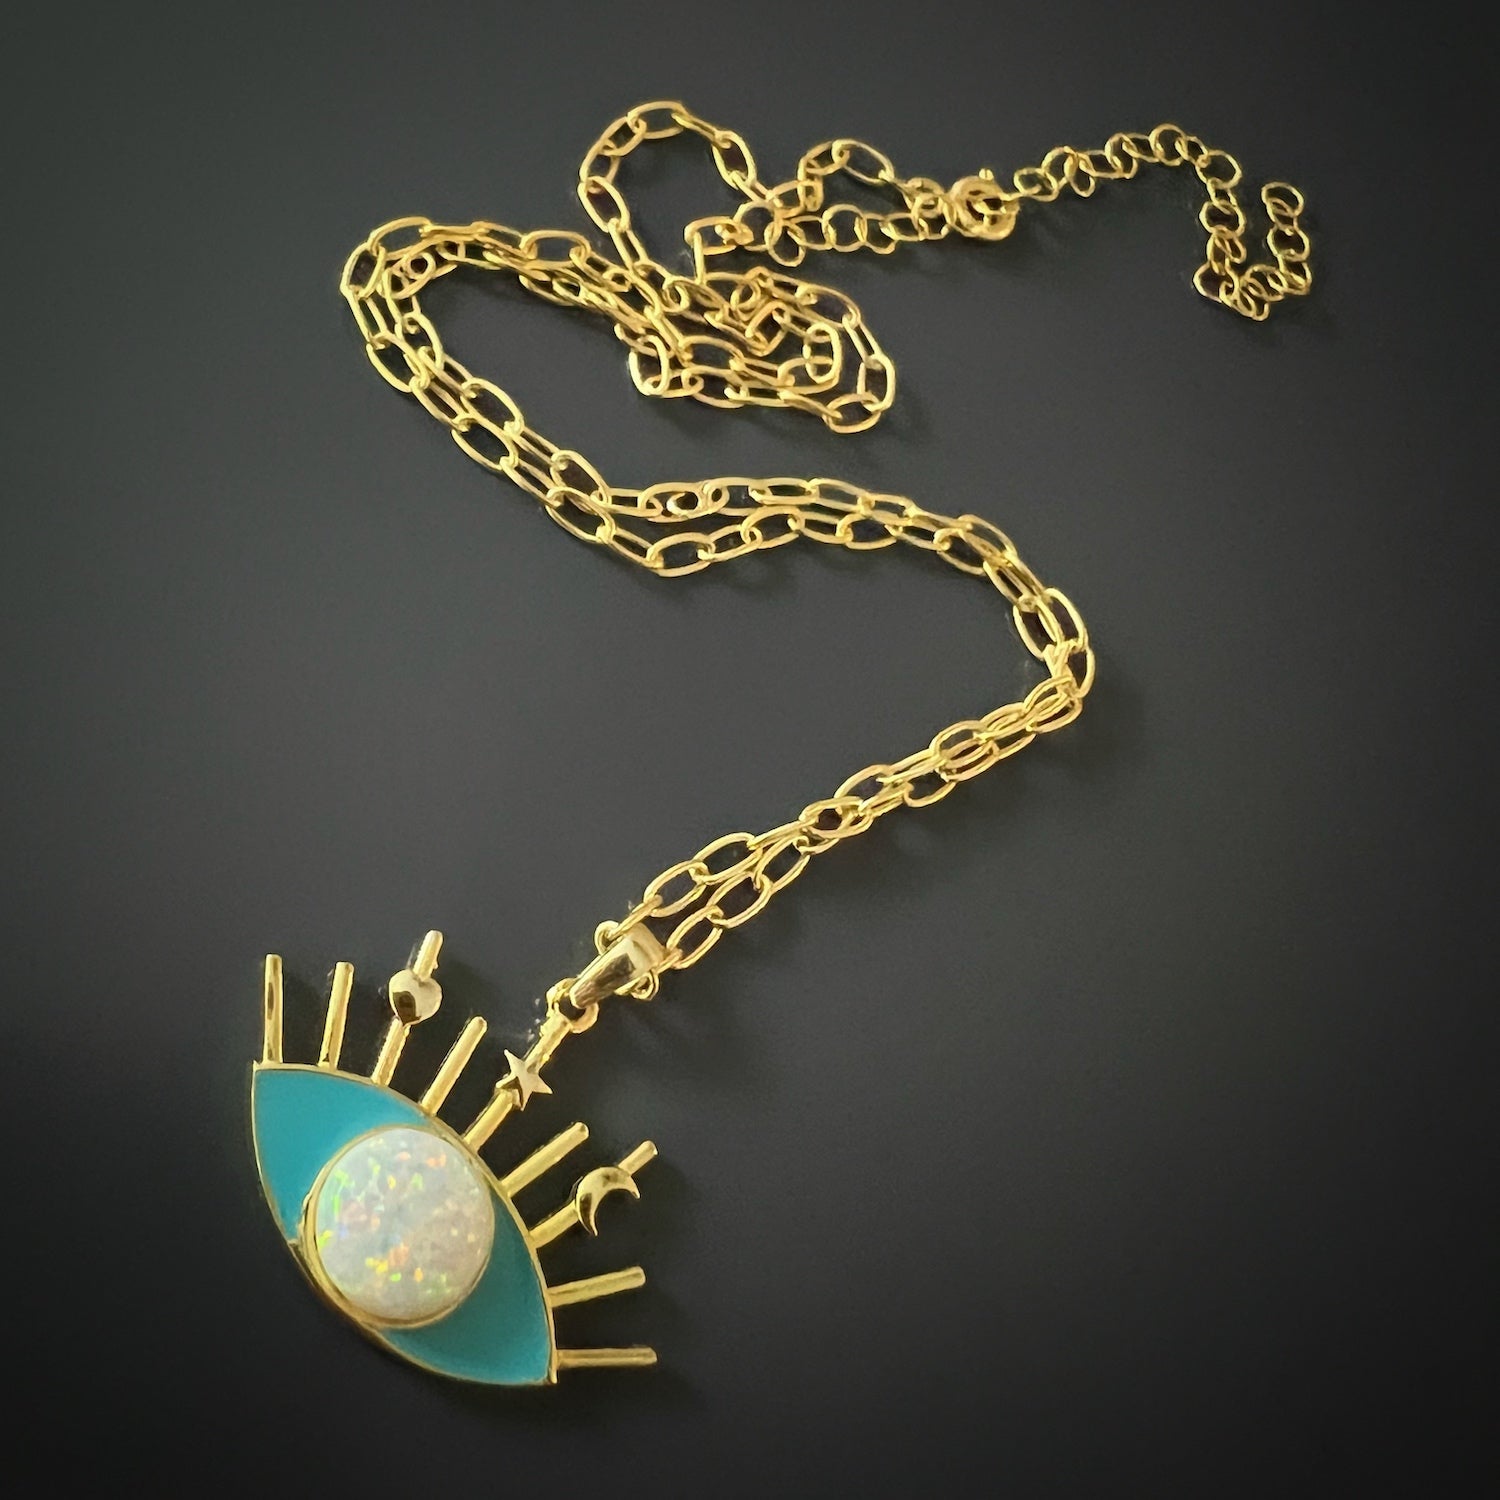 The Opal Turquoise Evil Eye Necklace, a powerful symbol of protection and style.